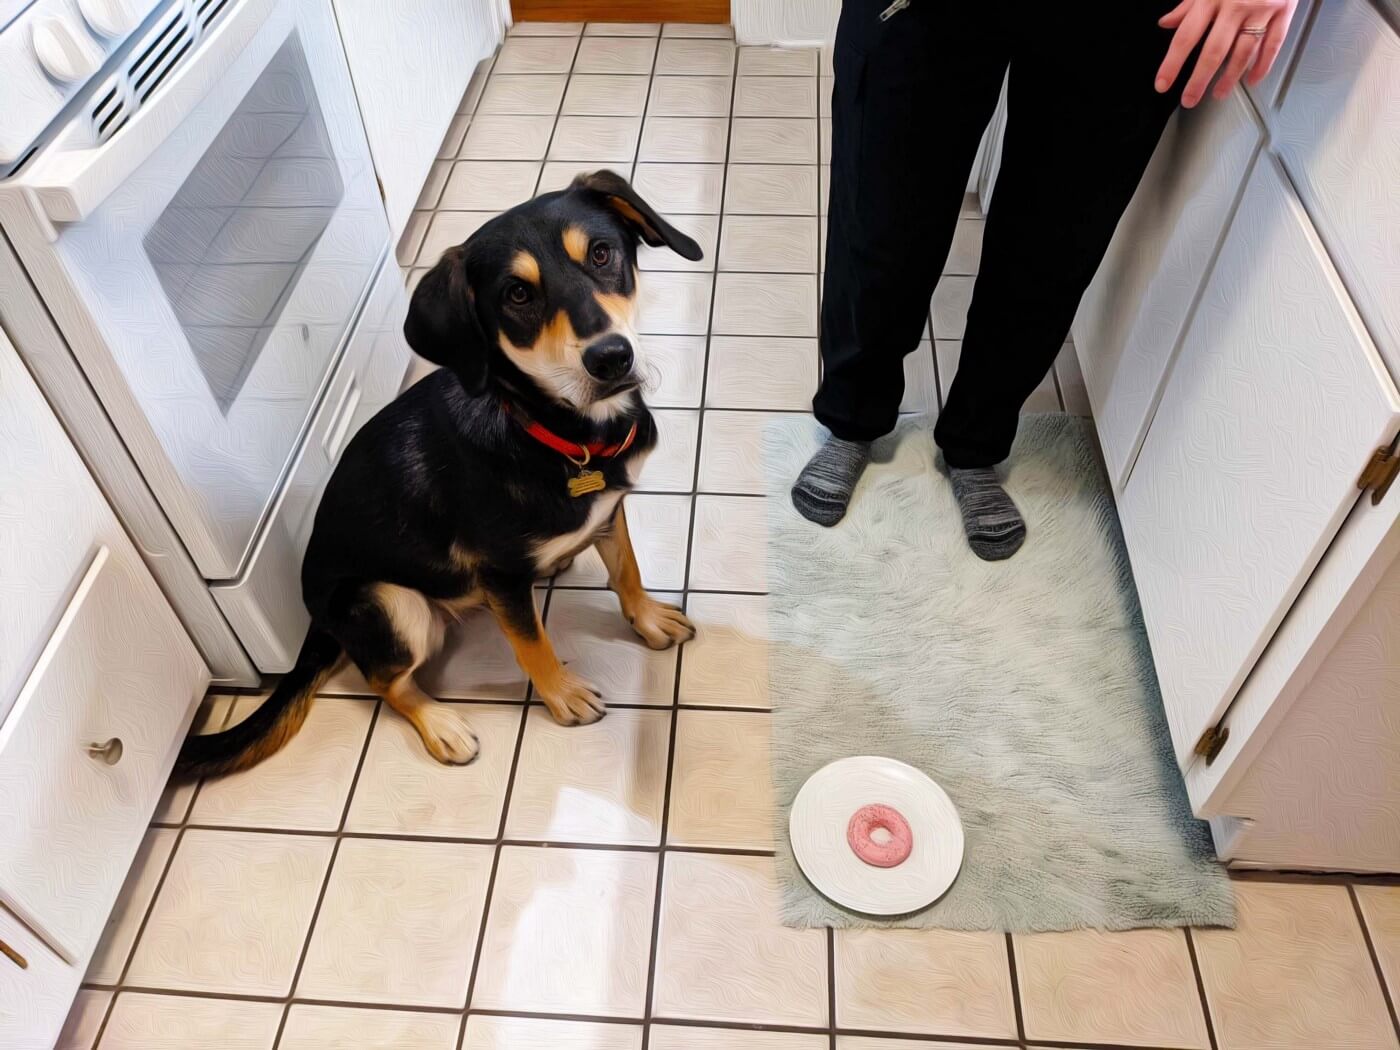 A photo of Poppy the dog looking upward at the camera next pink doughnut on a plate that is inexplicably on the kitchen door near the dog. Someone in socks (only the legs can be seen) stands near the dog